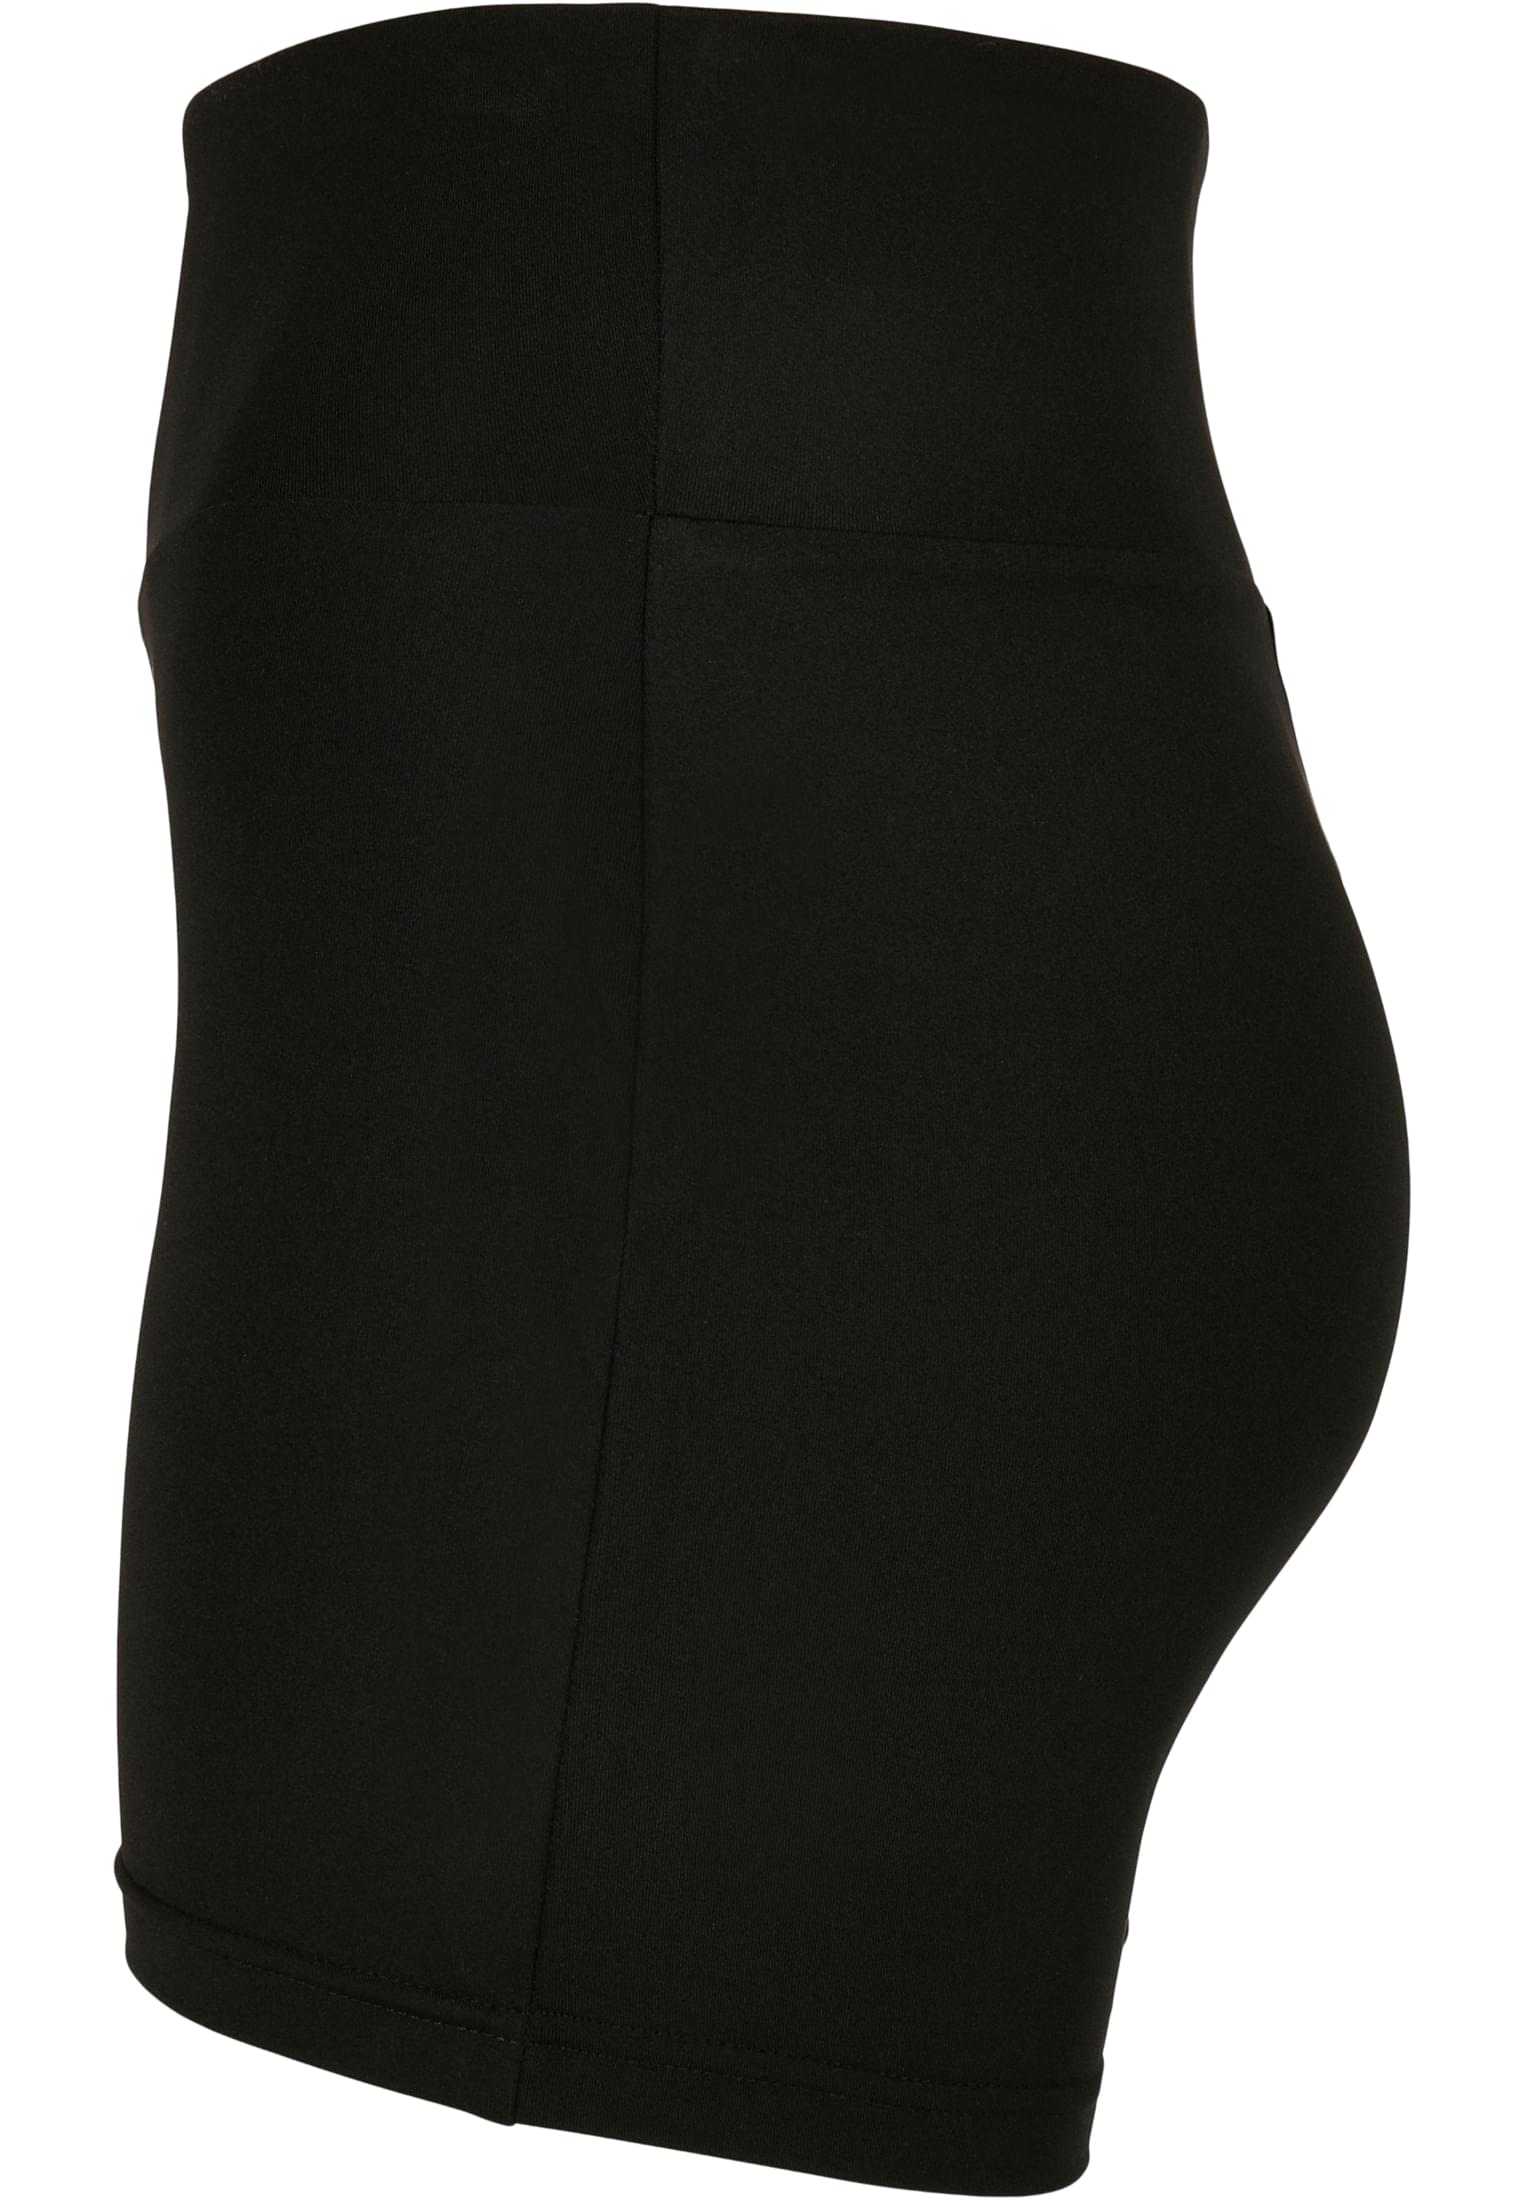 Frauen Ladies Recycled High Waist Cycle Hot Pants in Farbe black